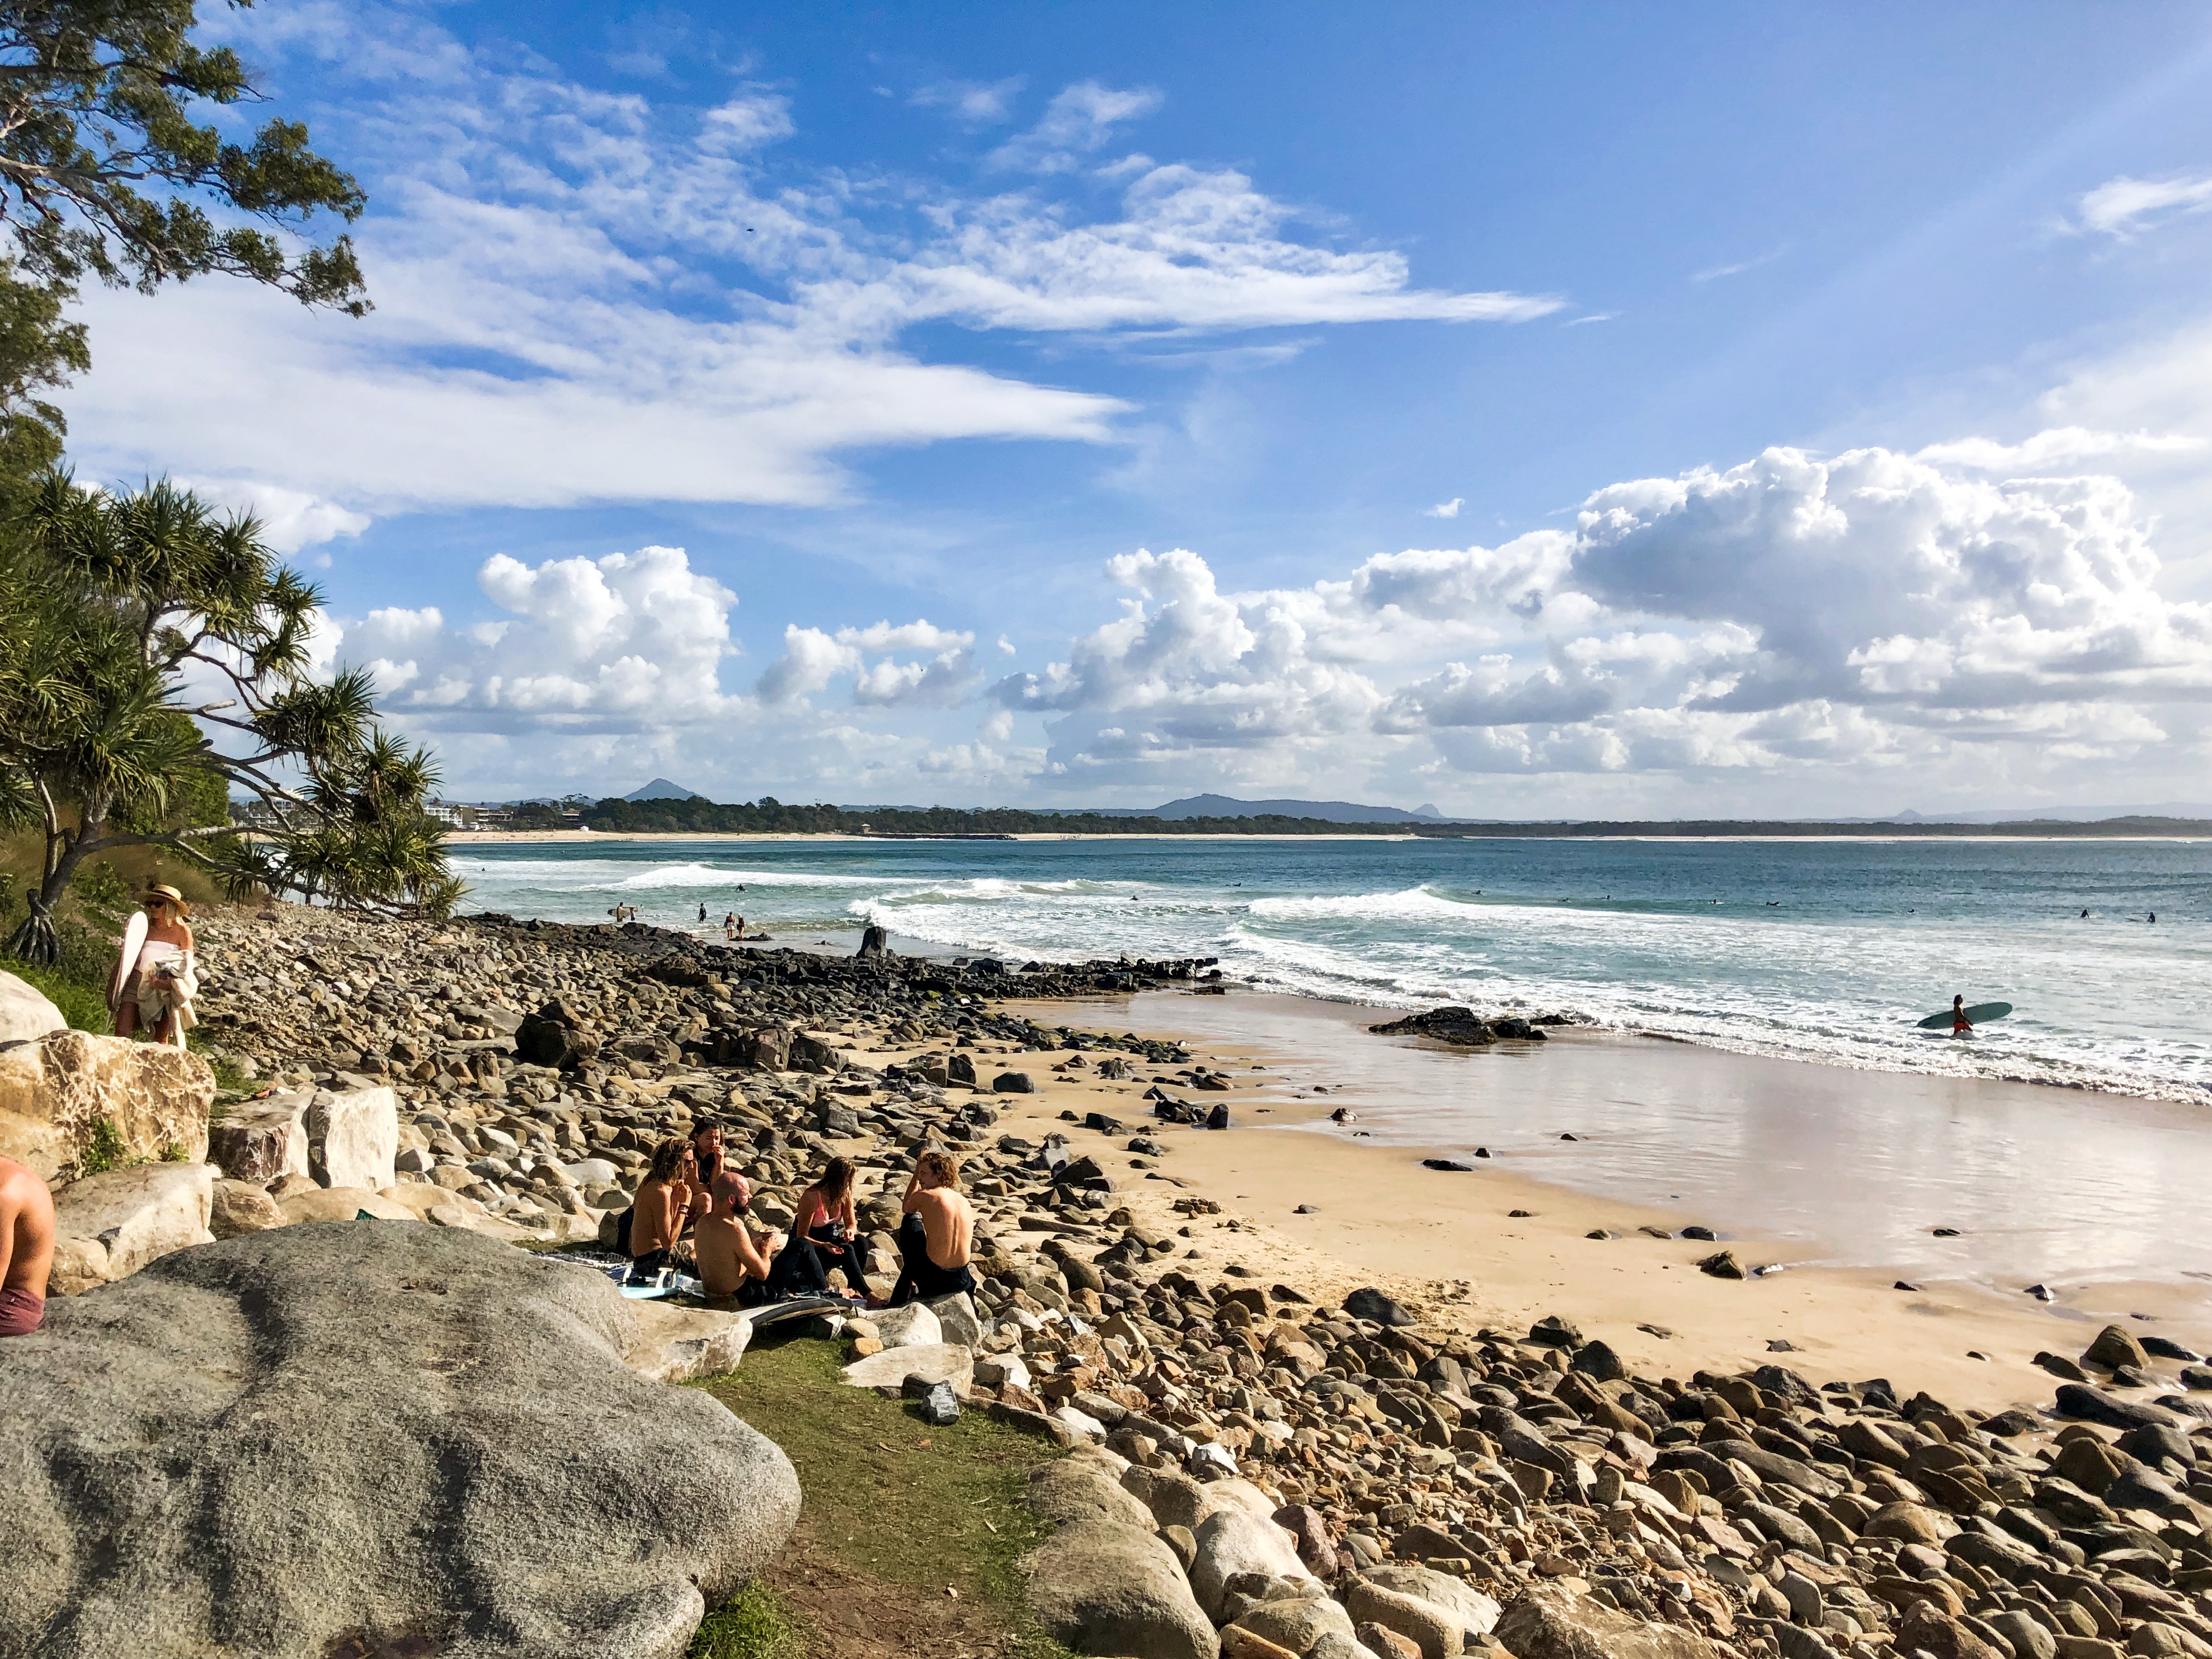 Noosa is so photogenic and very popular with surfers